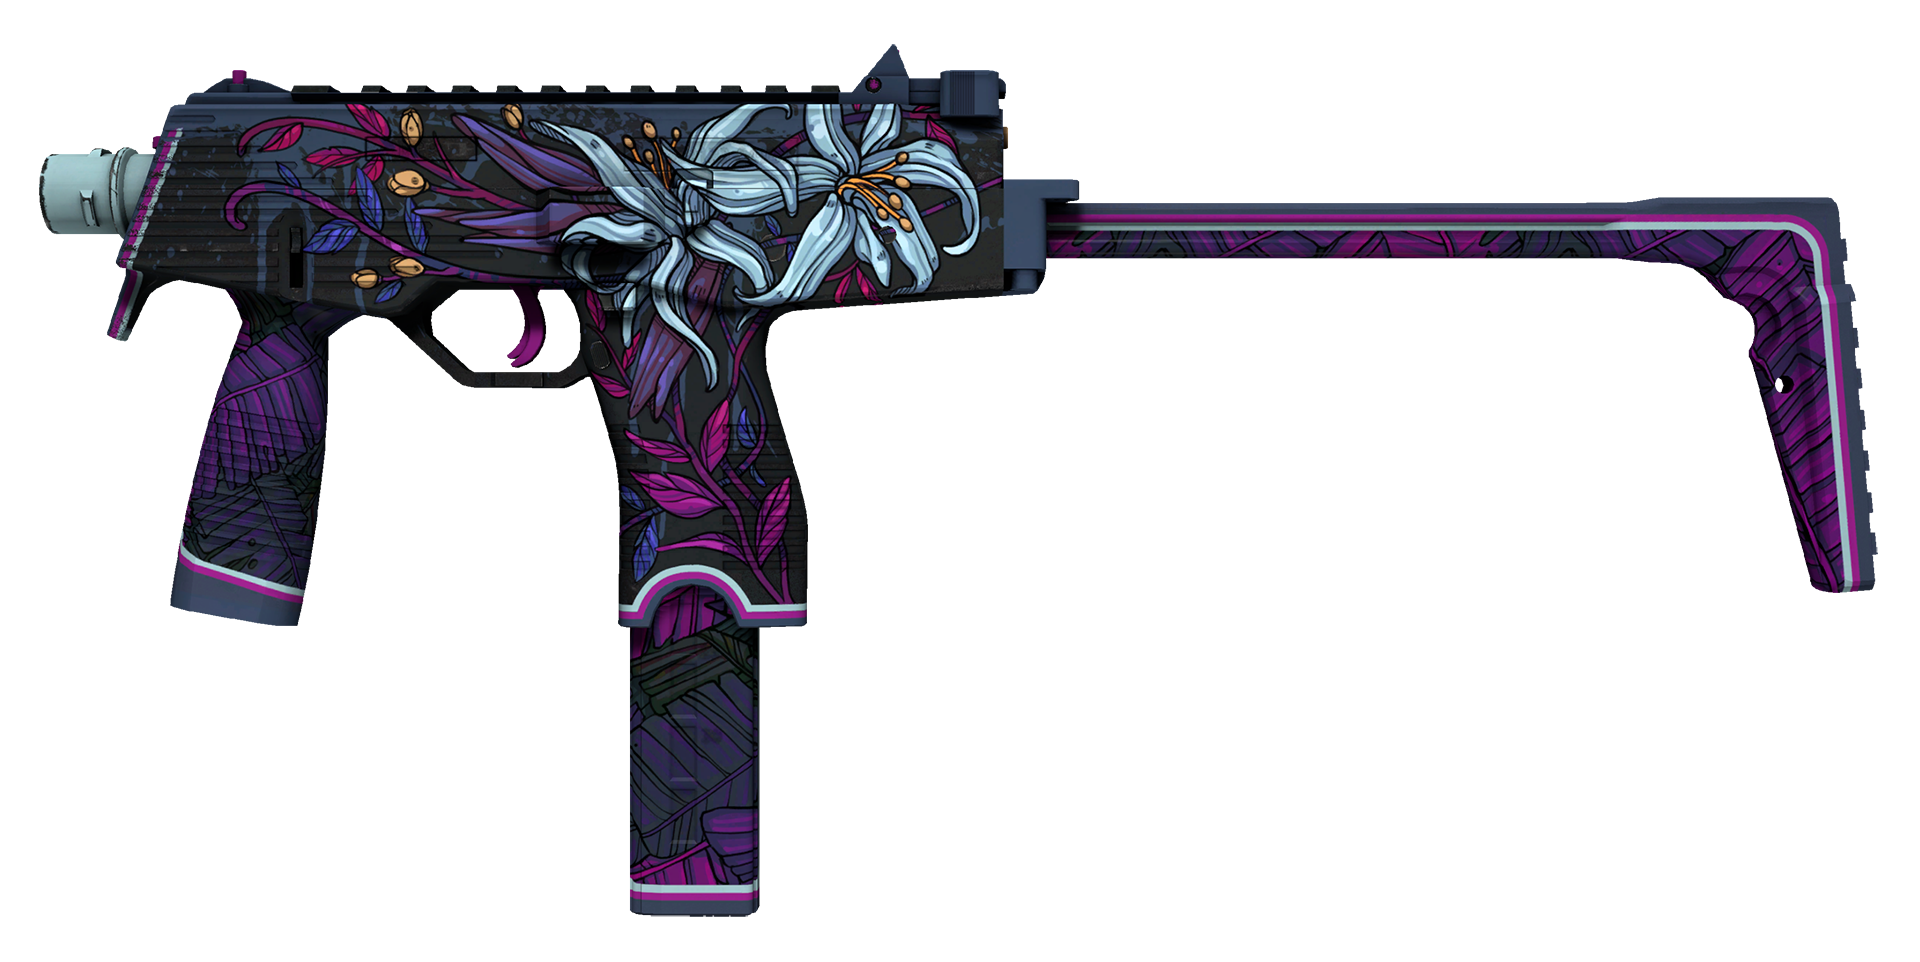 M4A4 Spider Lily cs go skin free